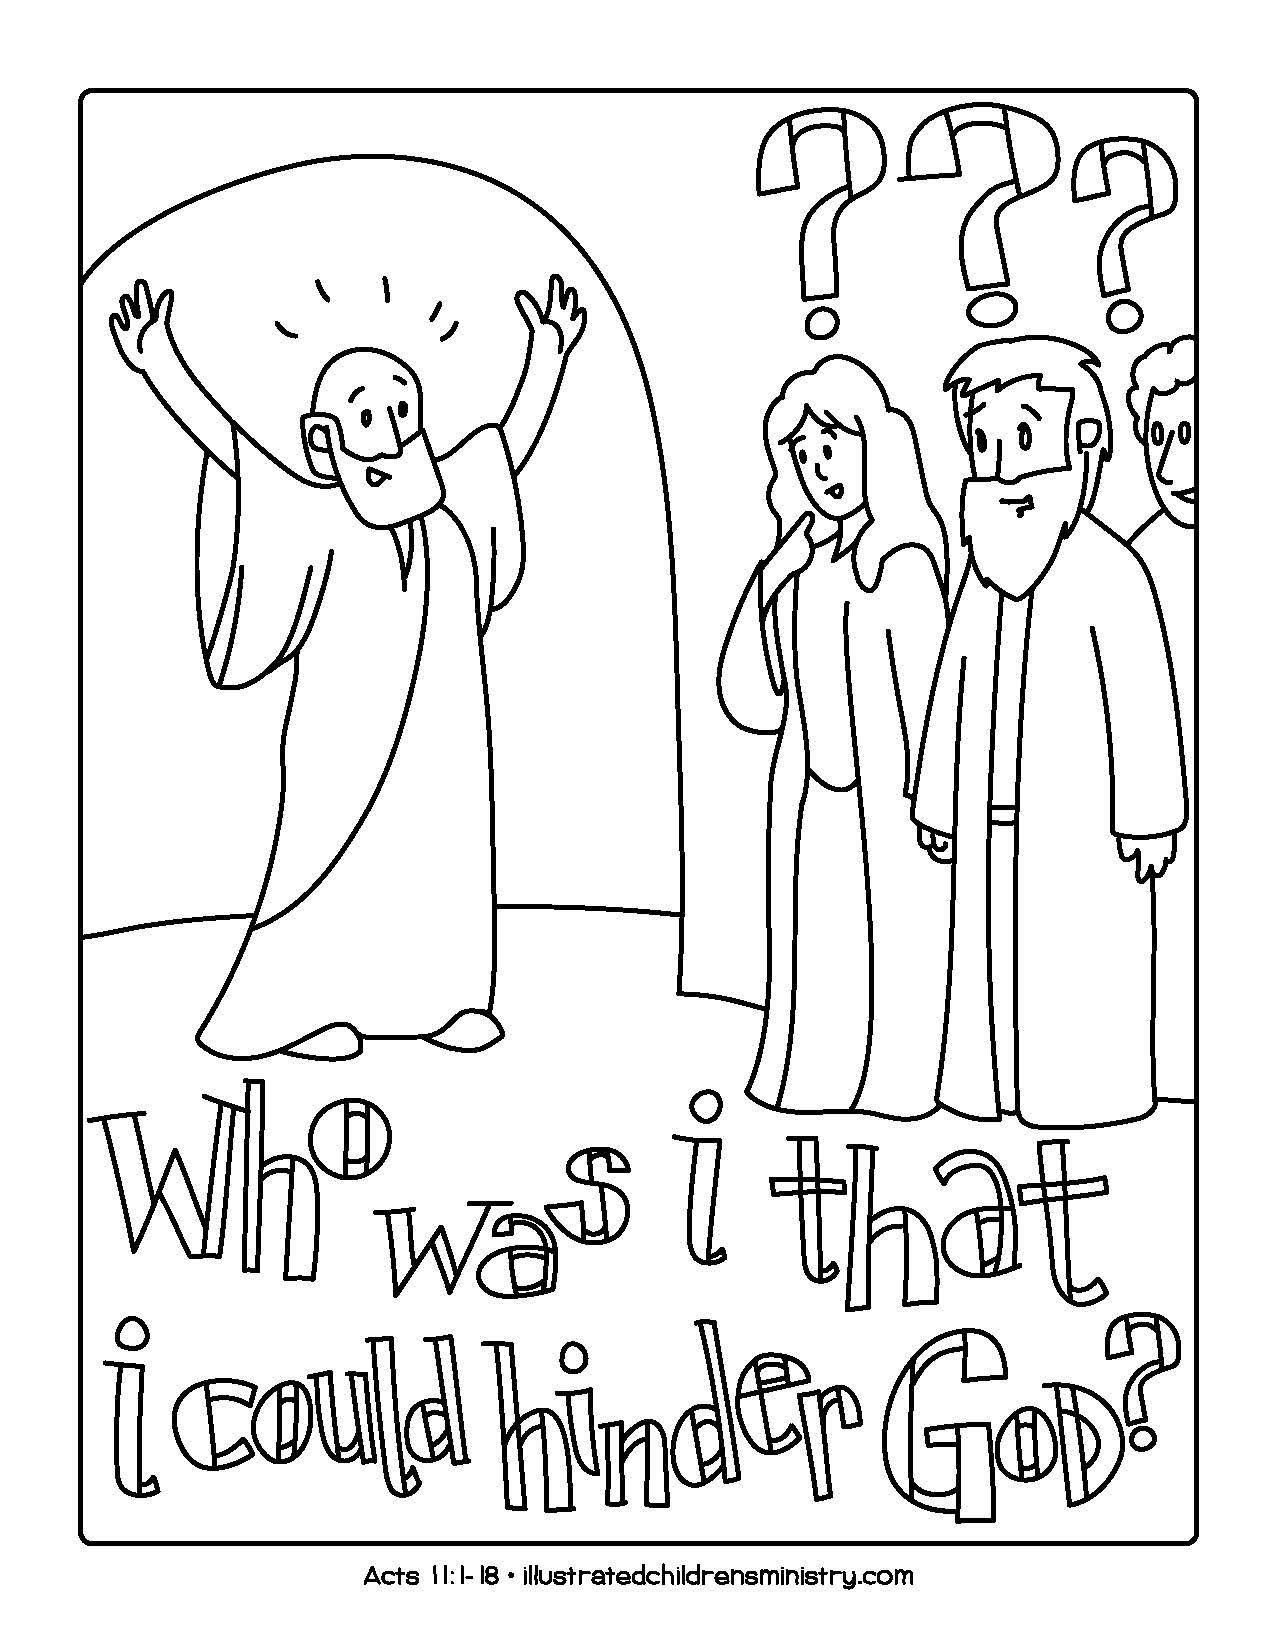 Cool Acts 1 5 Coloring Page